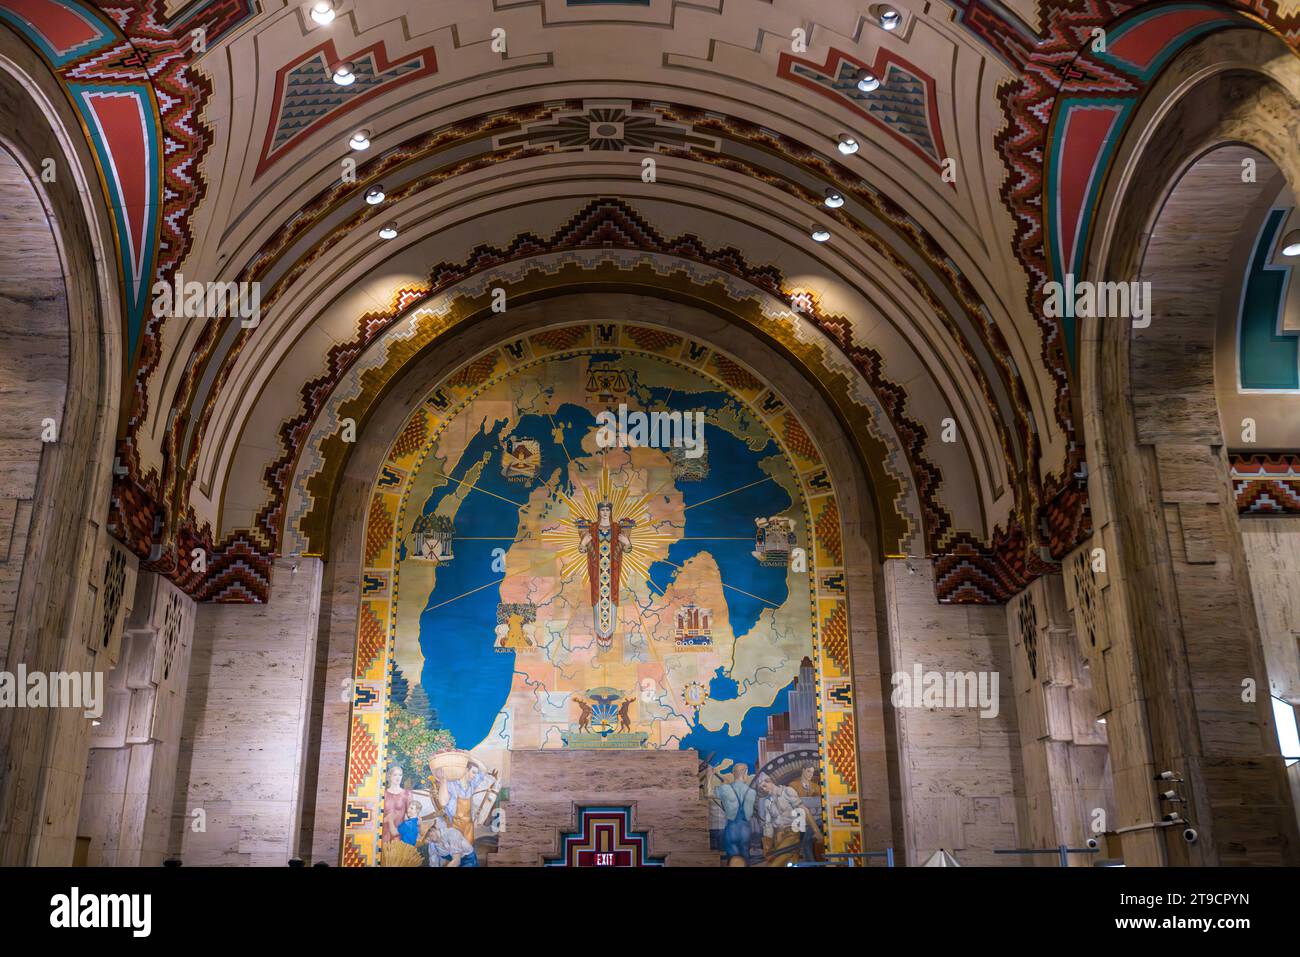 Large mural in Detroit's Guardian Building banking hall depicts the state of Michigan and its industries, painted by American artist Ezra Augustus Winter. Historic art deco skyscraper Guardian Building built in 1928 with a colorful tiled lobby & retail space. Detroit, United States Stock Photo